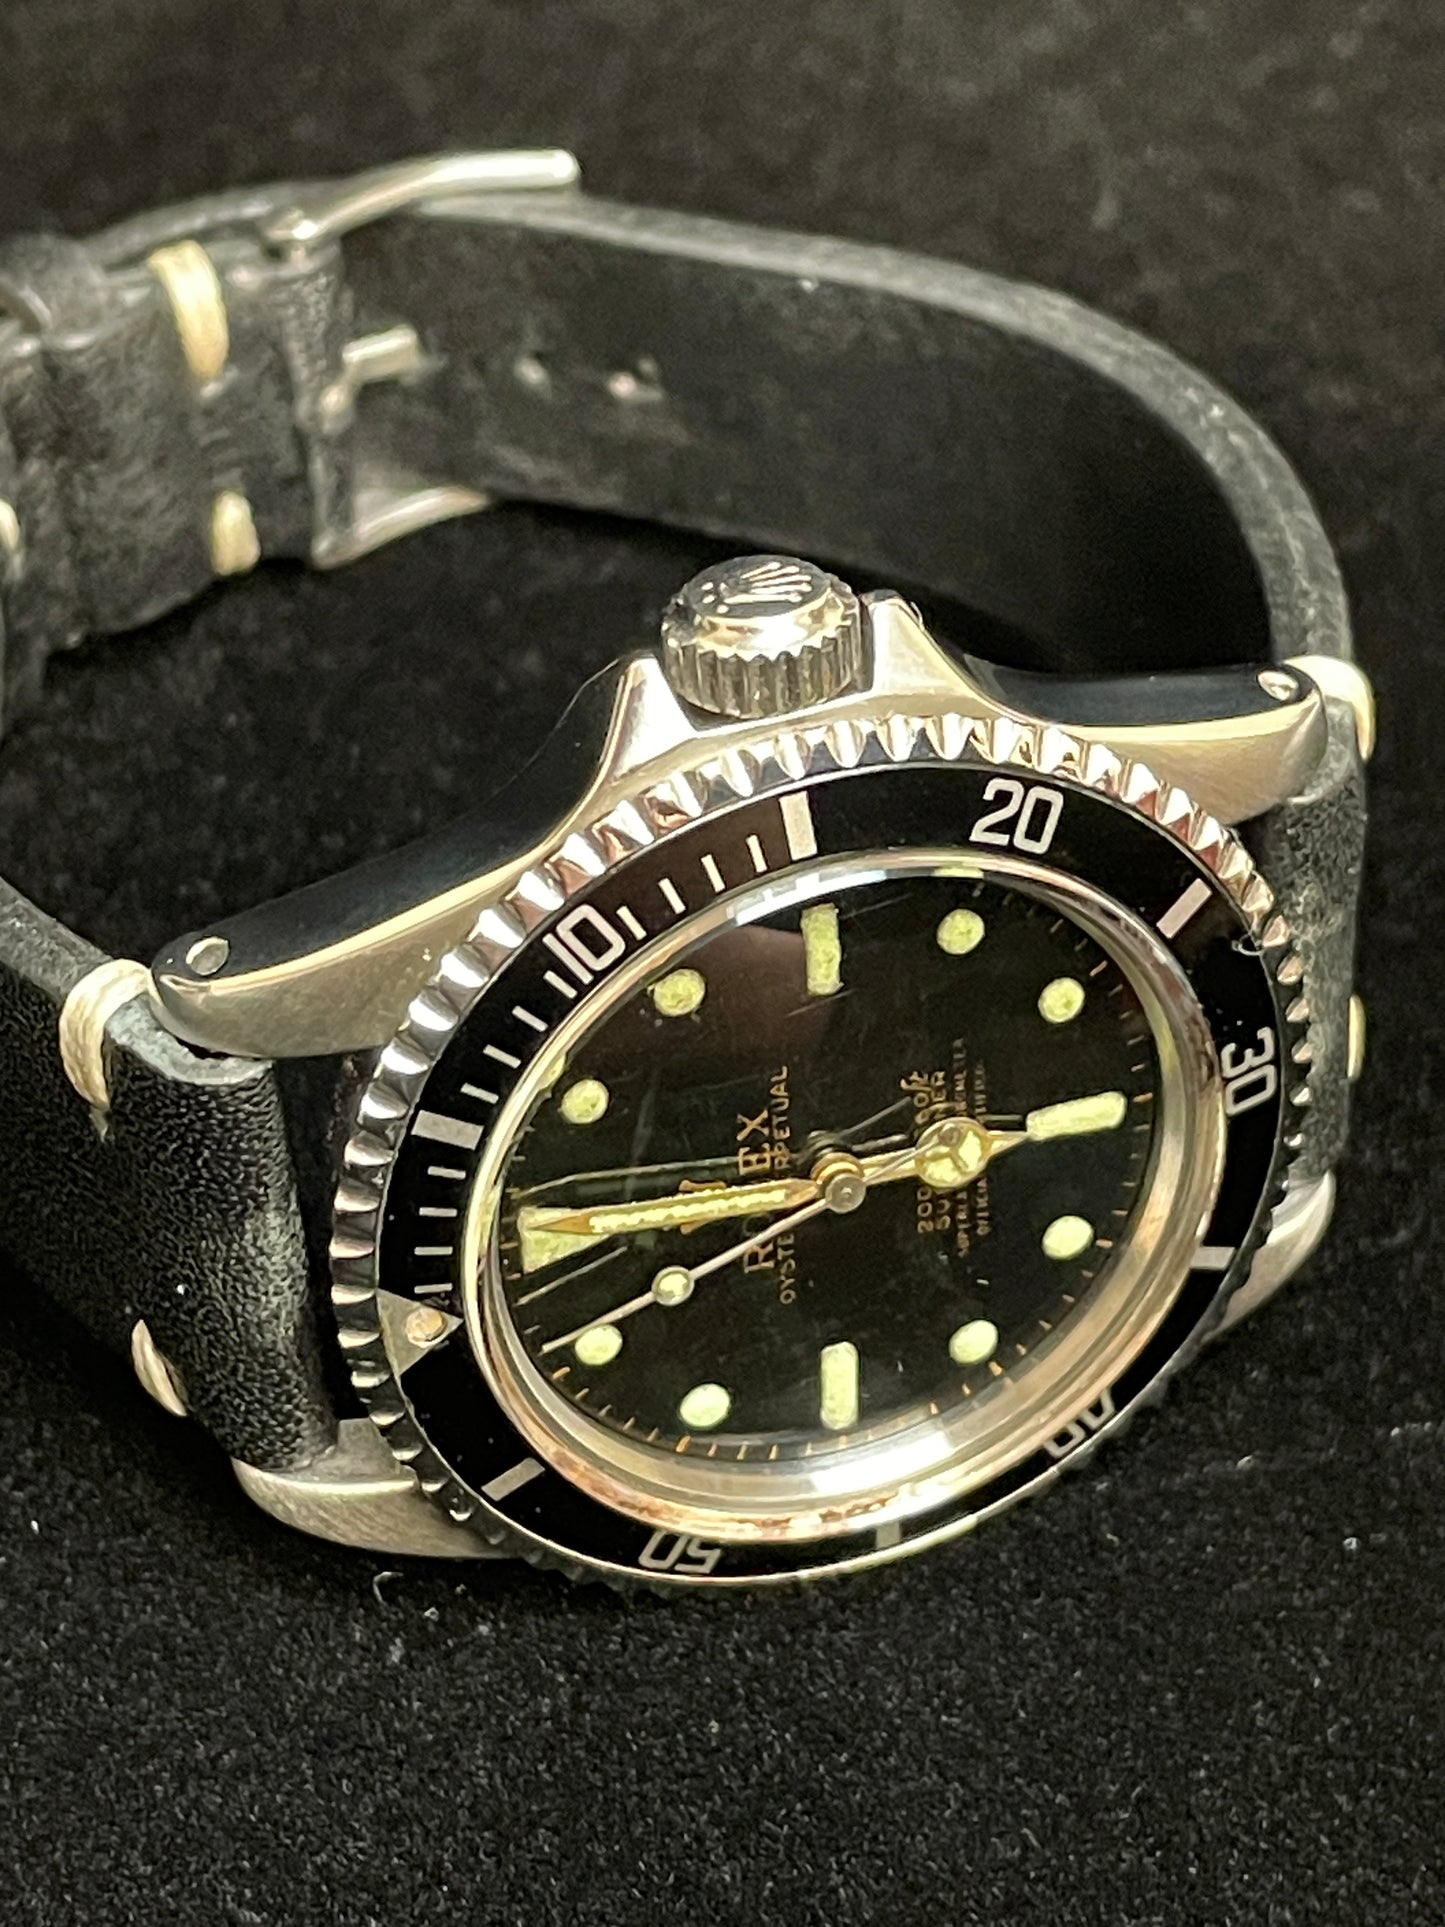 1964 Rolex Submariner 5512 Black Relumed Dial Leather Strap No Papers 40mm